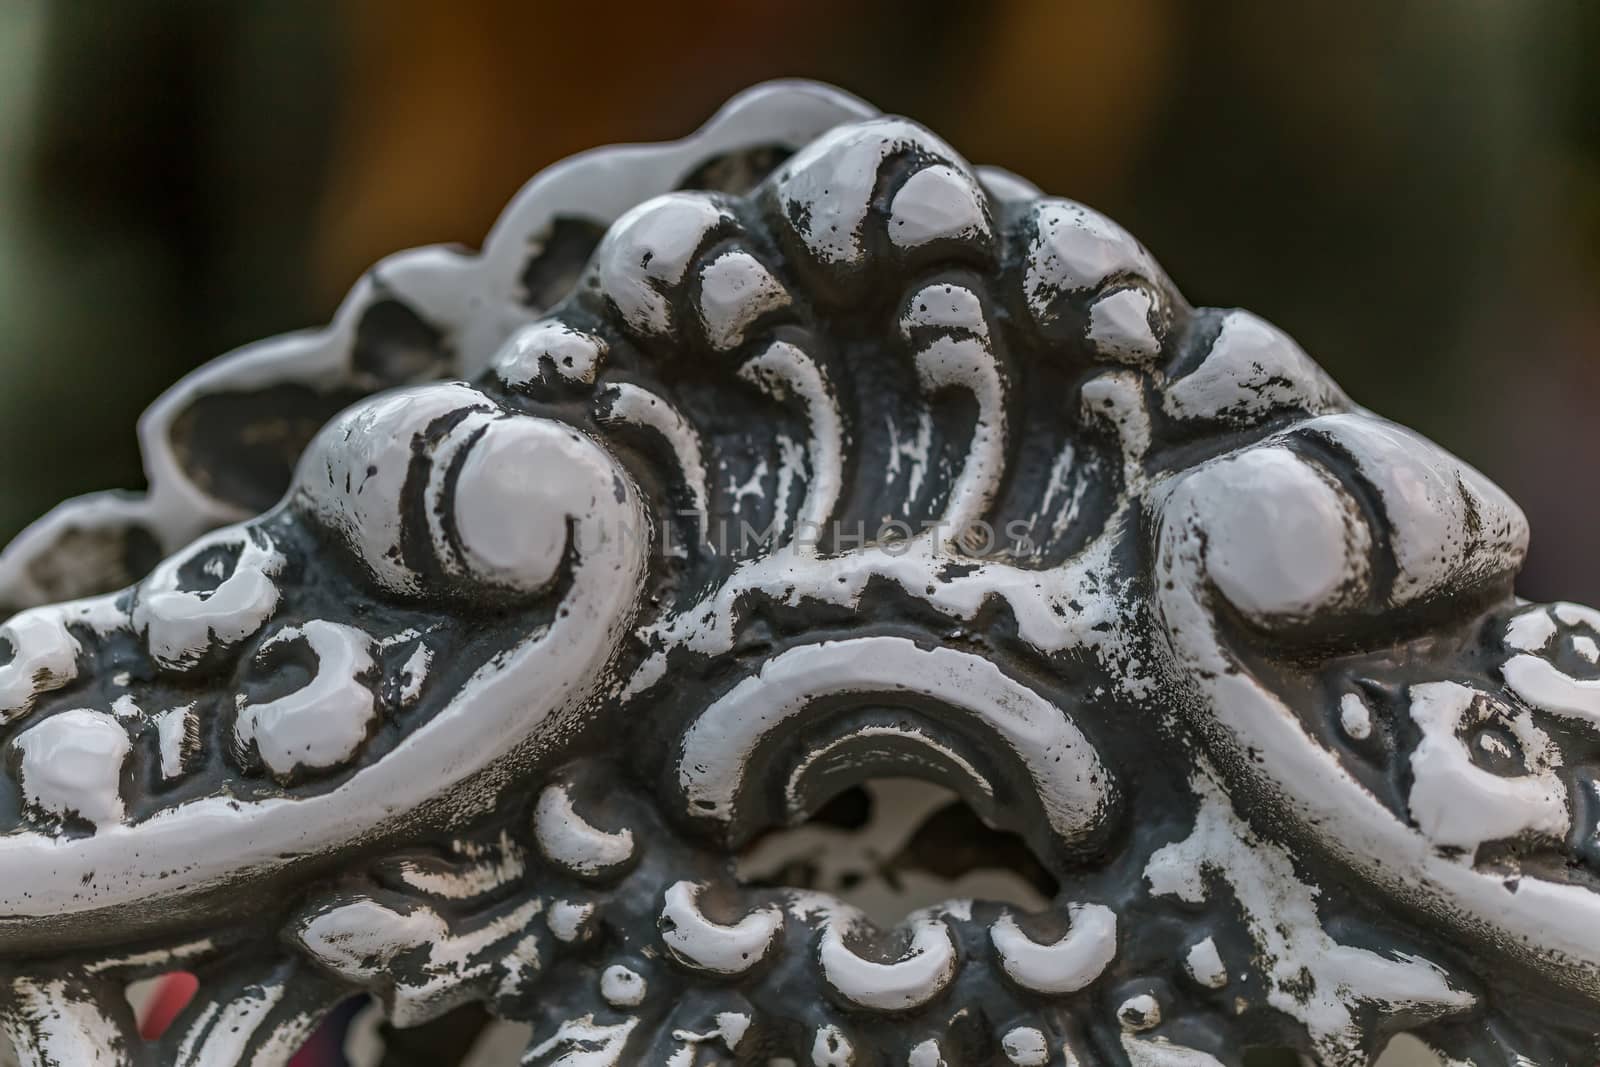 Pattern detail on a wrought iron bench in a park.